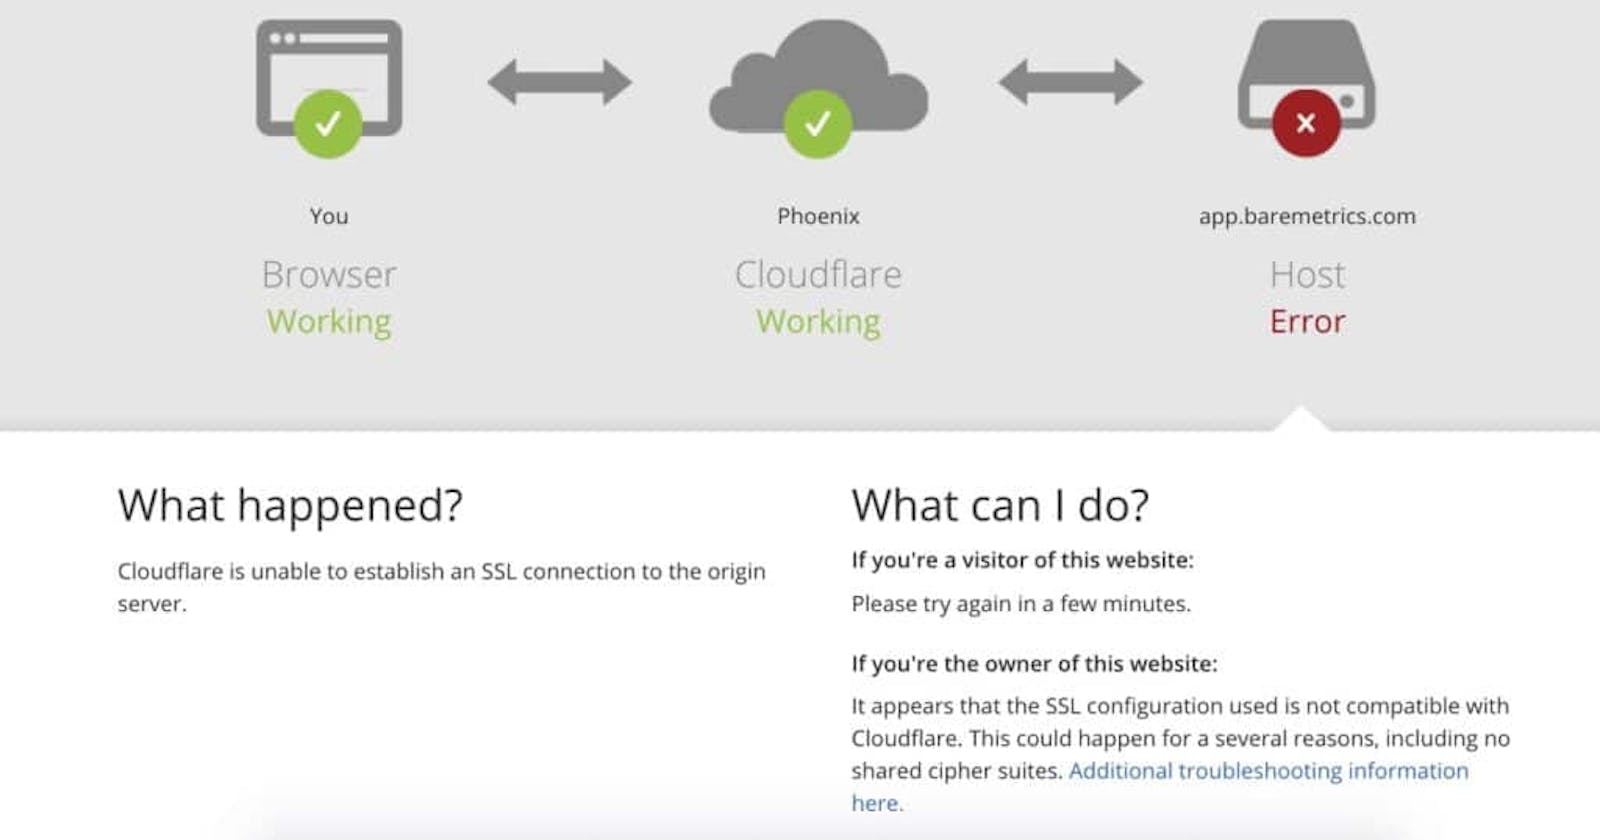 What Cloudflare Error 525 and How to Fix It?